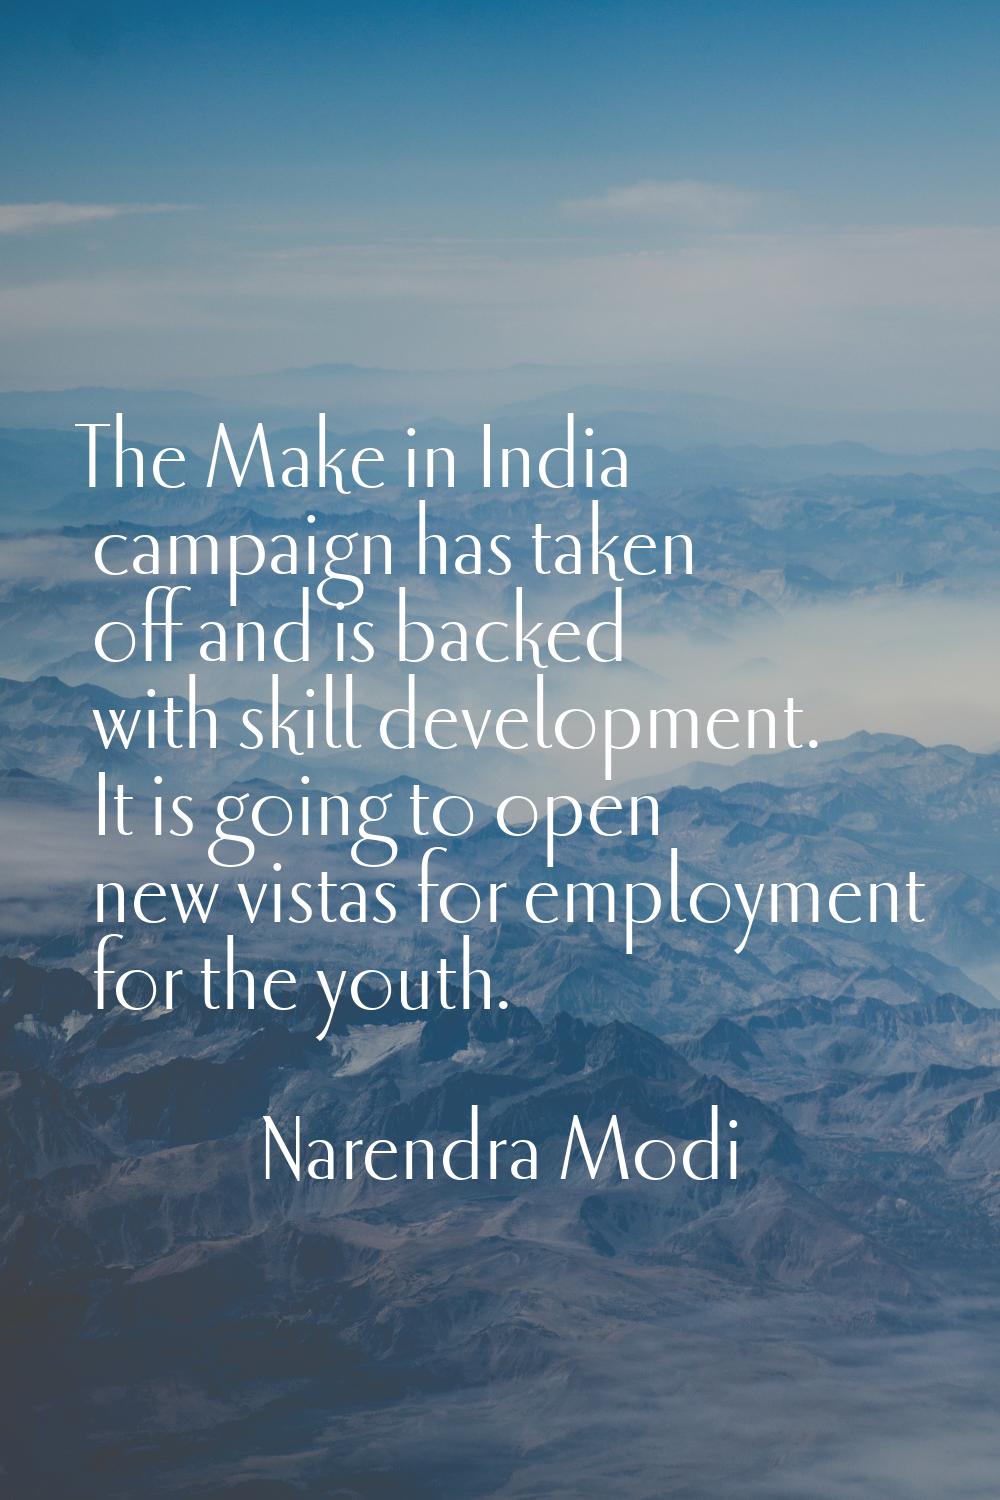 The Make in India campaign has taken off and is backed with skill development. It is going to open 